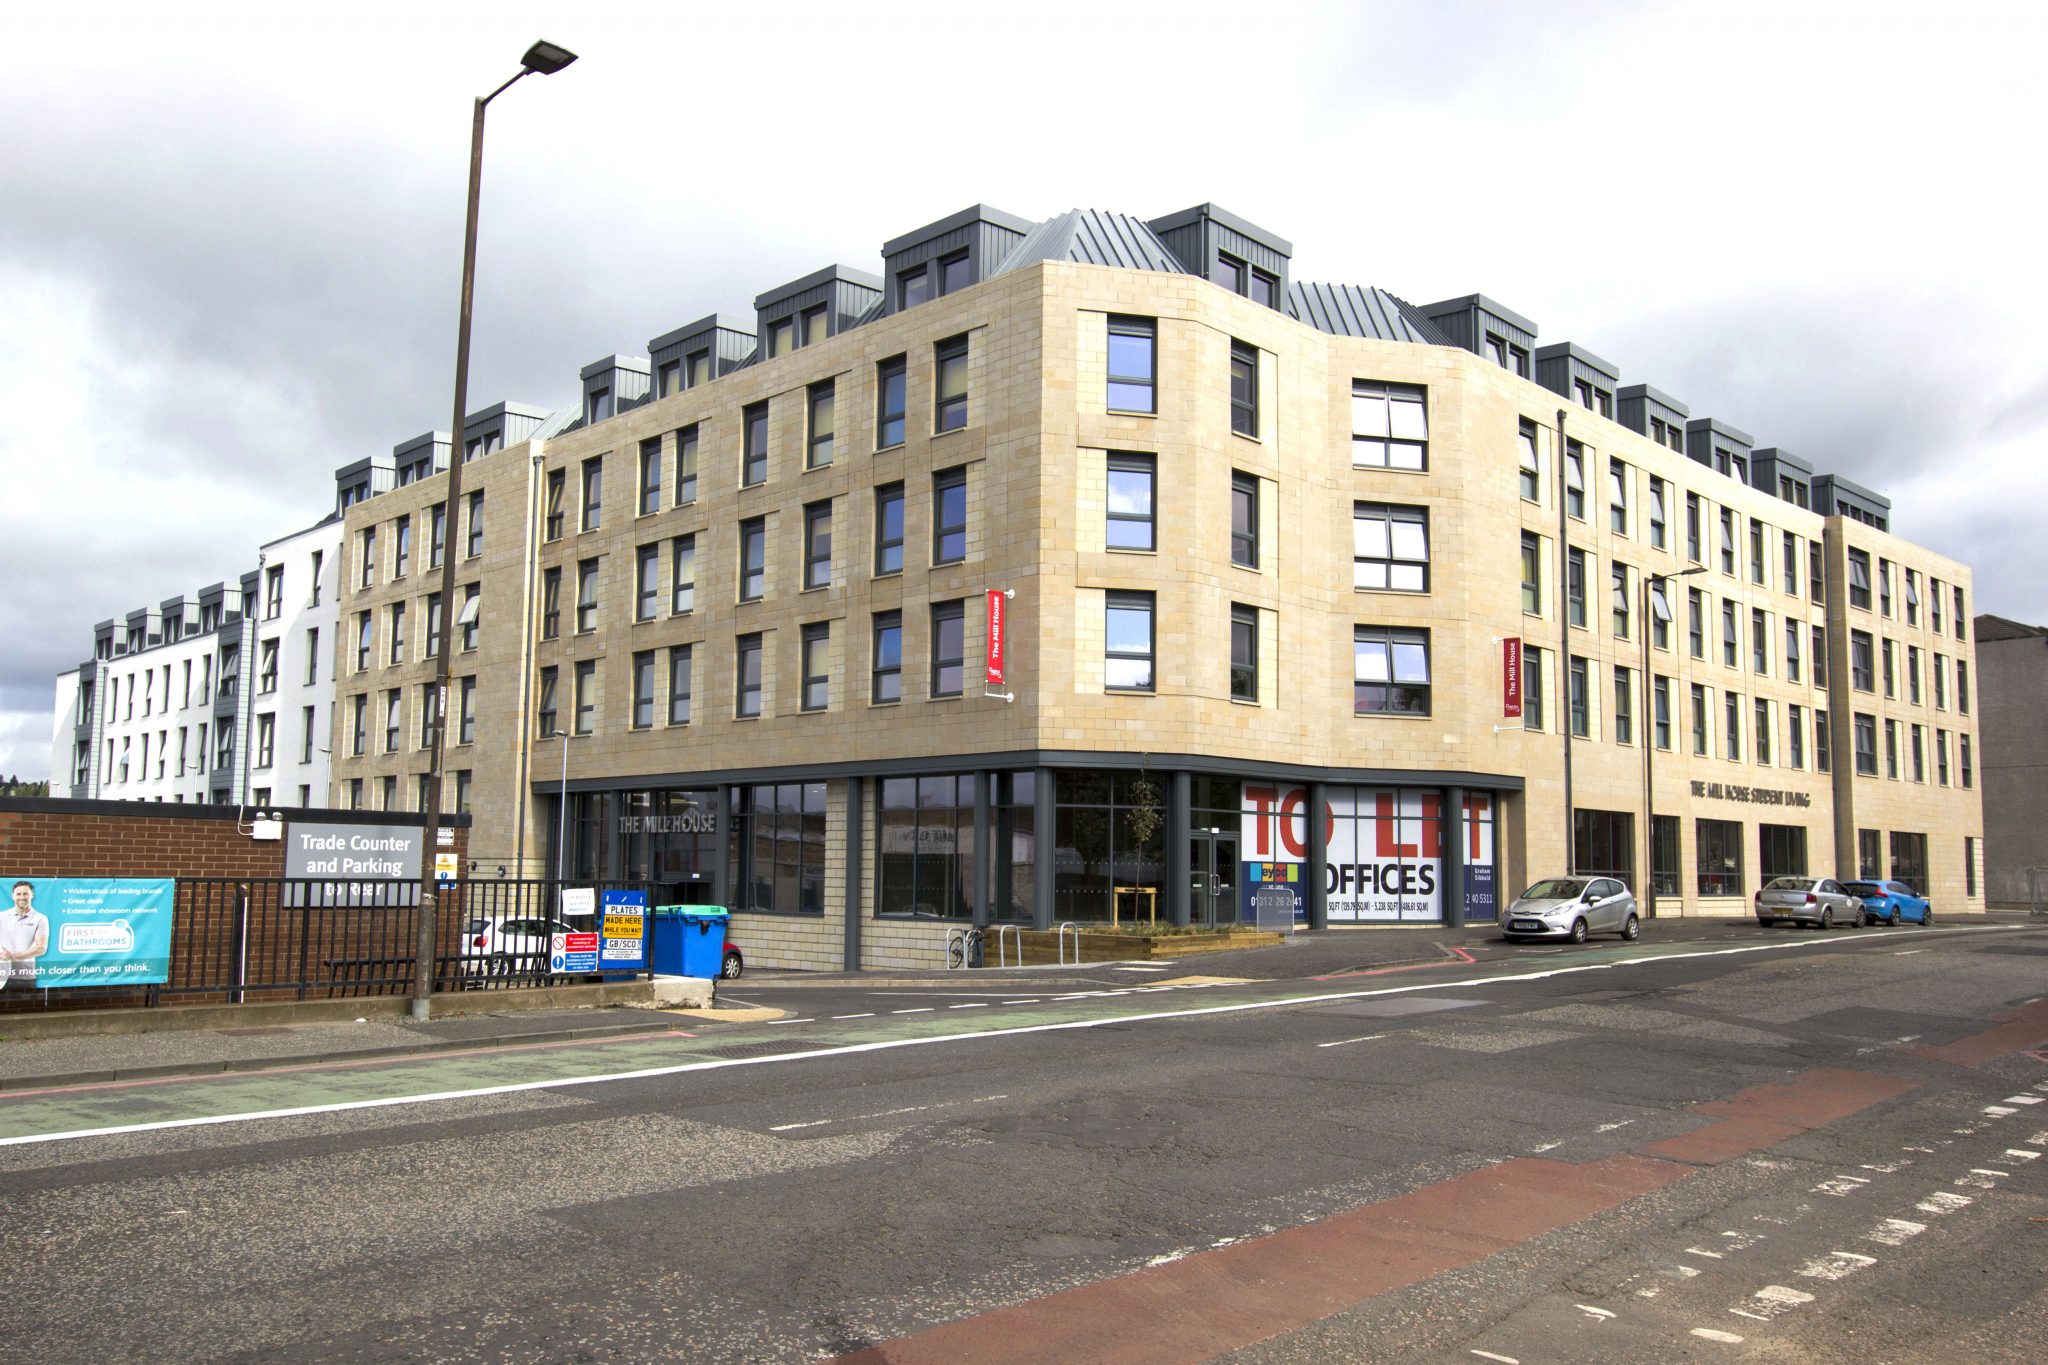 IP INVESTMENT MANAGEMENT AND MAVEN SELL STUDENT HOUSING PORTFOLIO TO KWAP AND 90 NORTH FOR £39.8M